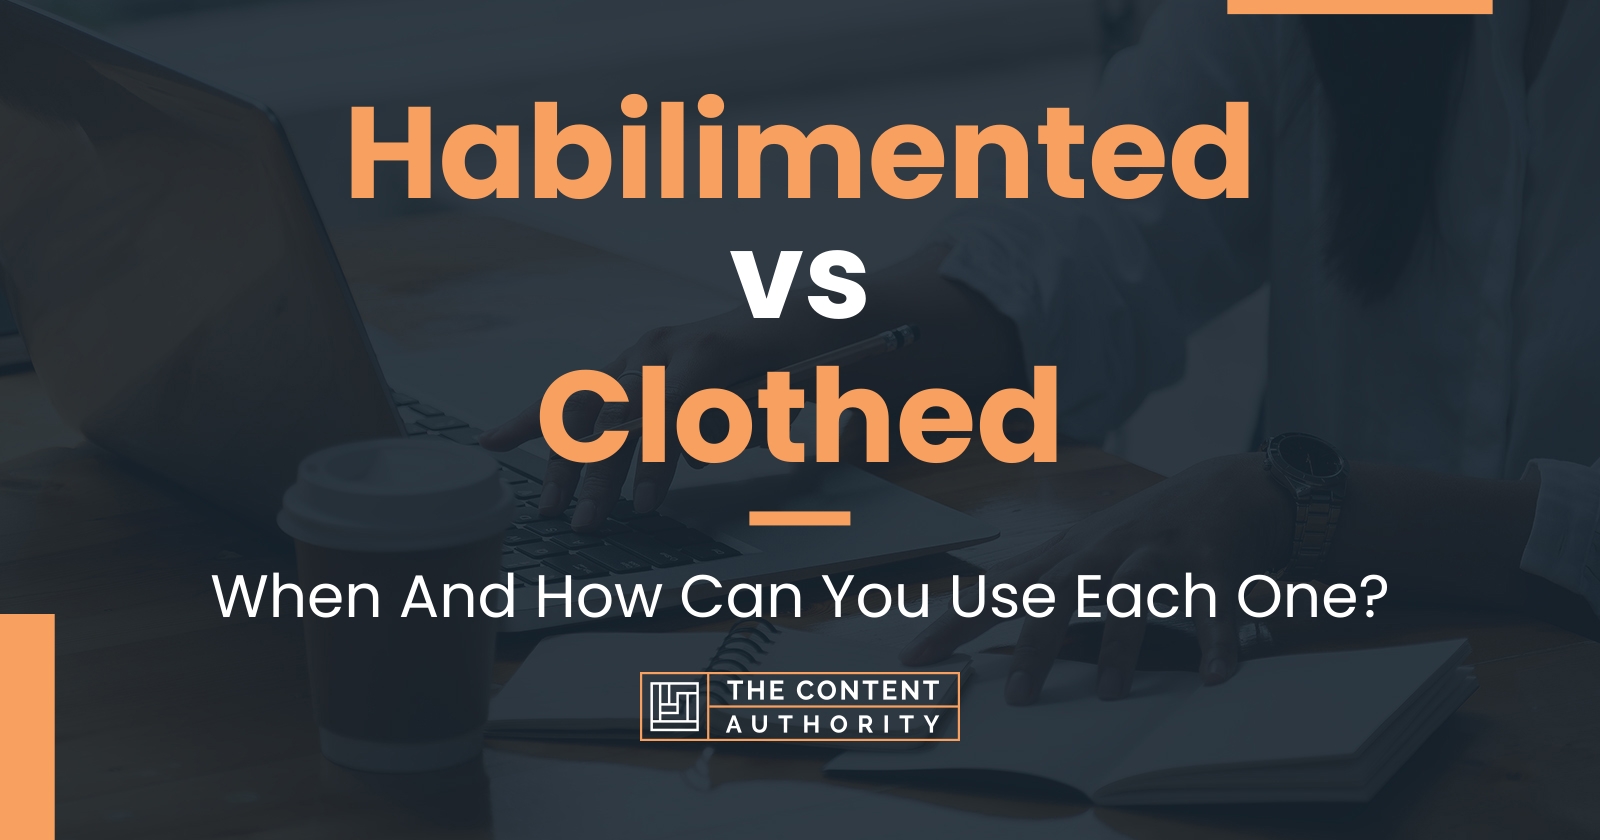 Habilimented vs Clothed: When And How Can You Use Each One?